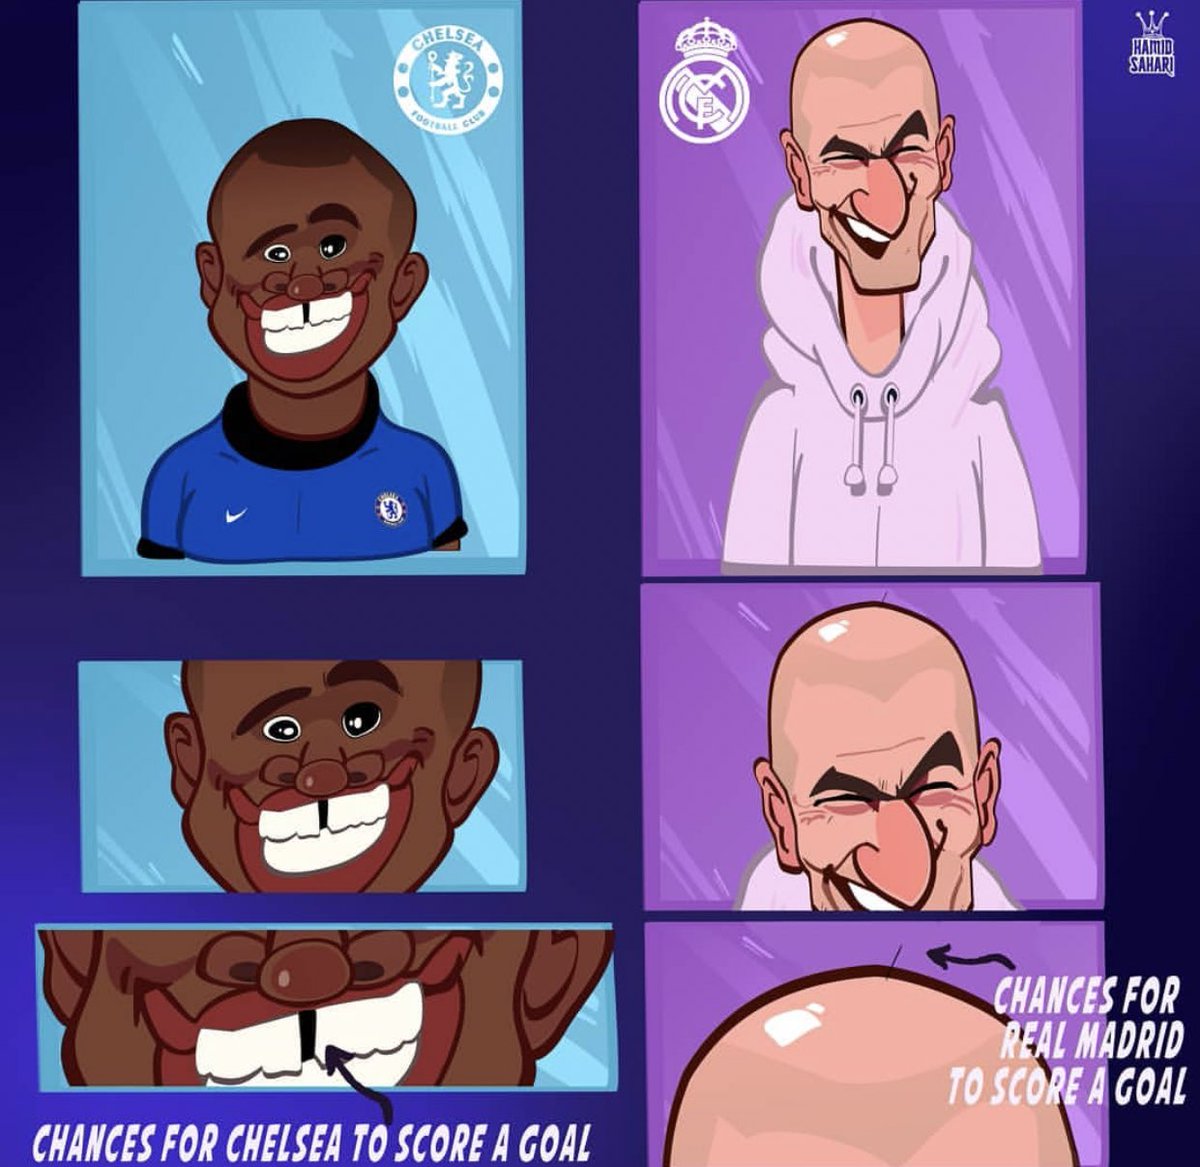 chances for Chelsea and Real Madrid to score a goal in a match each other! 😐 #Chelsea #ChelseaFC #RealMadrid #ChampionsLeague #Champions #Zidane #kante